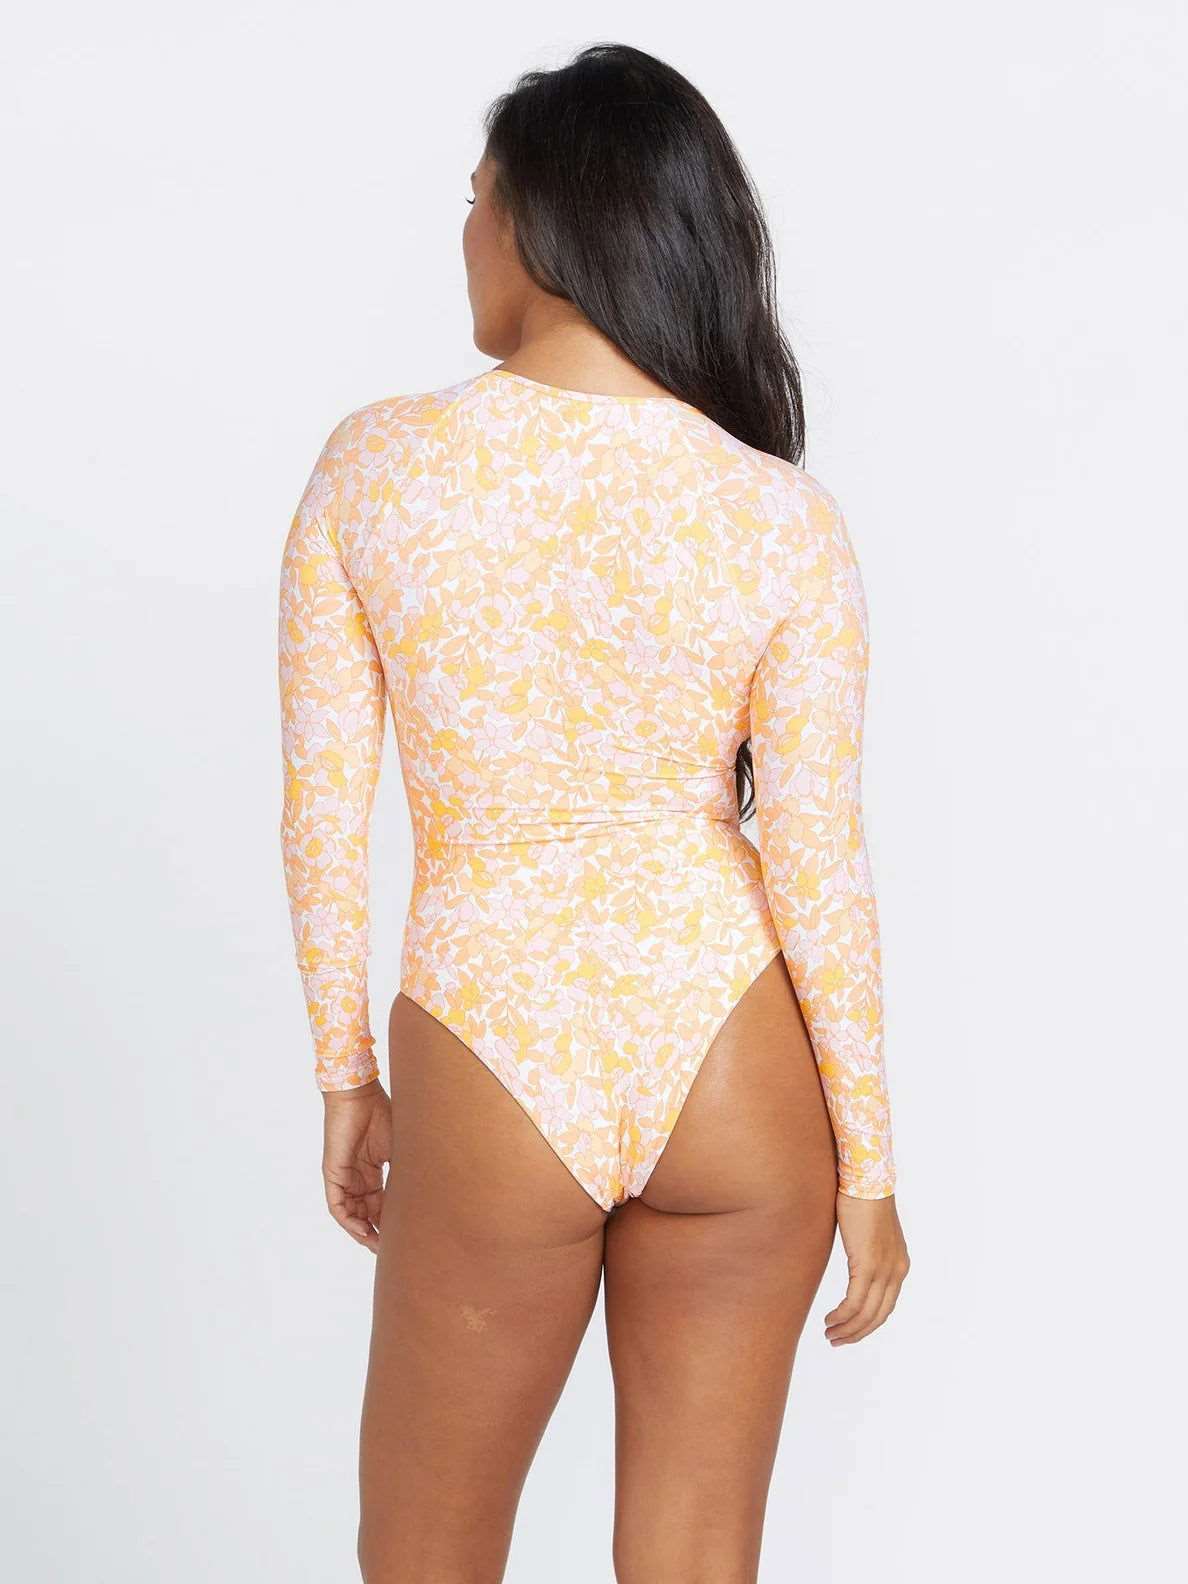 Volcom - Coco One Piece Swimsuit | Melon -  - Married to the Sea Surf Shop - 